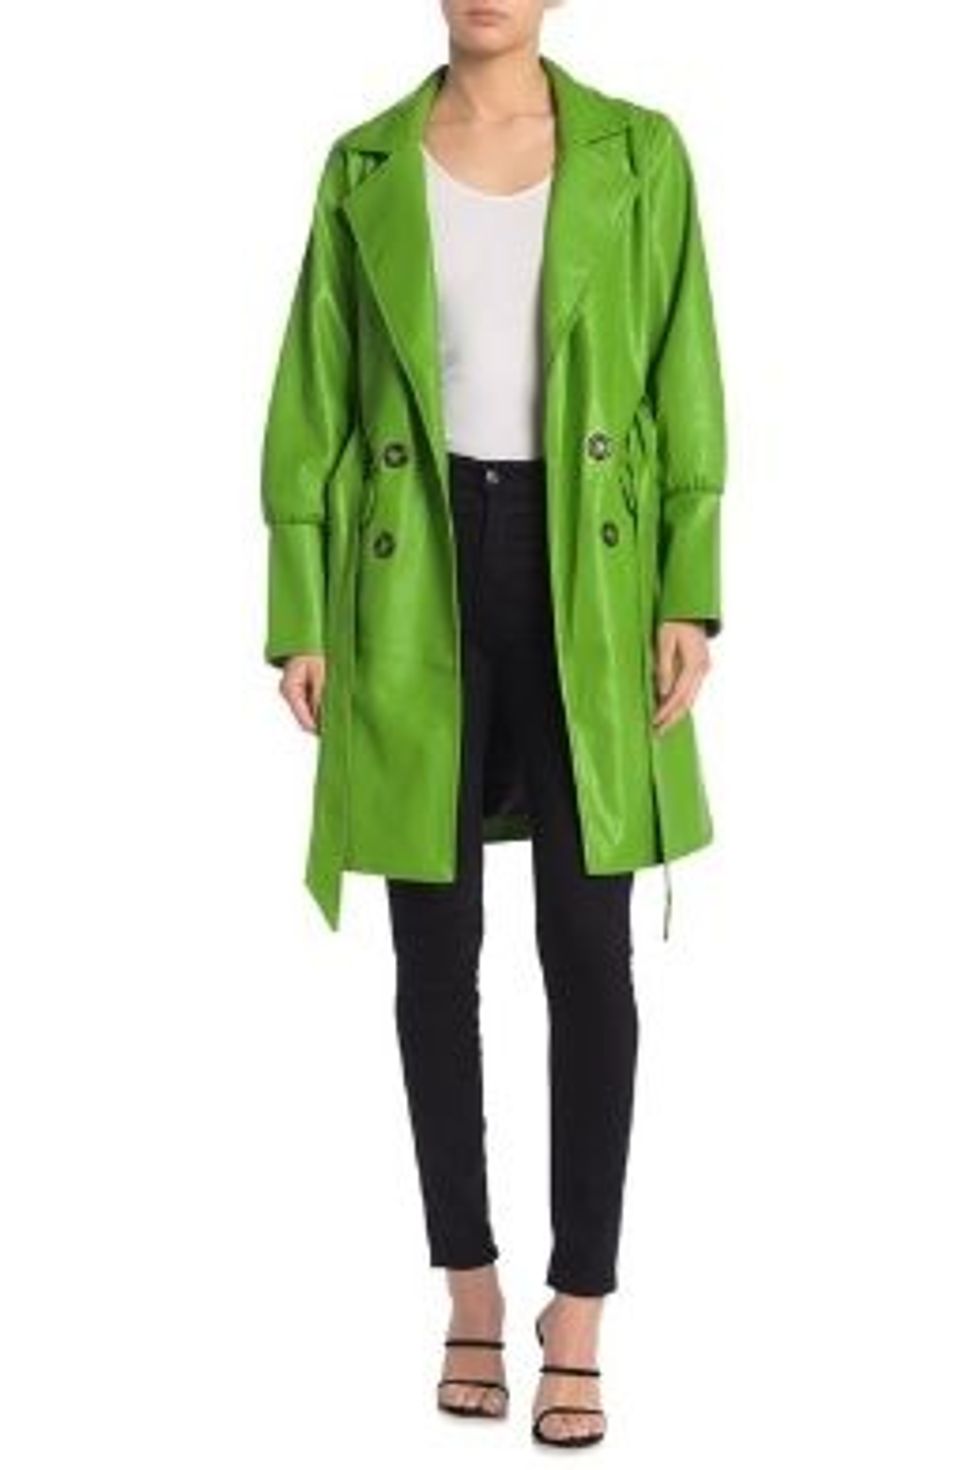 bright green leather jacket